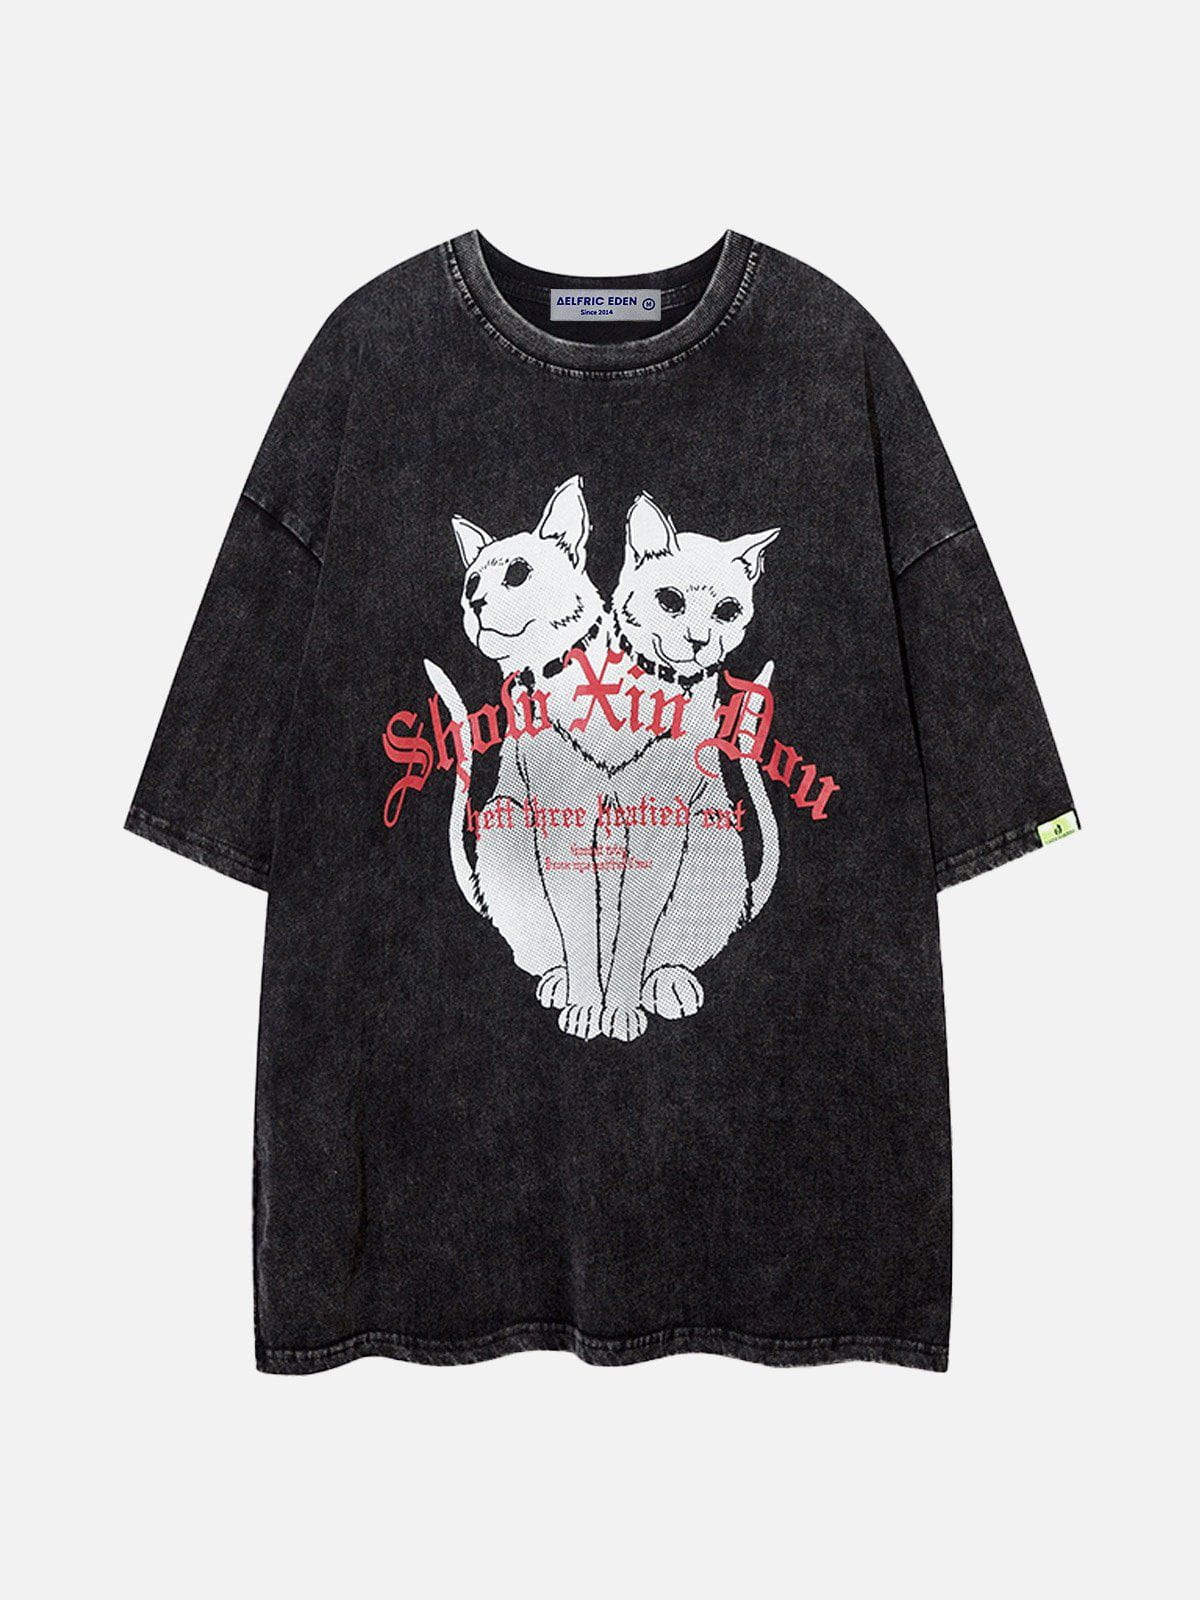 WLS Abstract Two-Headed Cat Print Tee